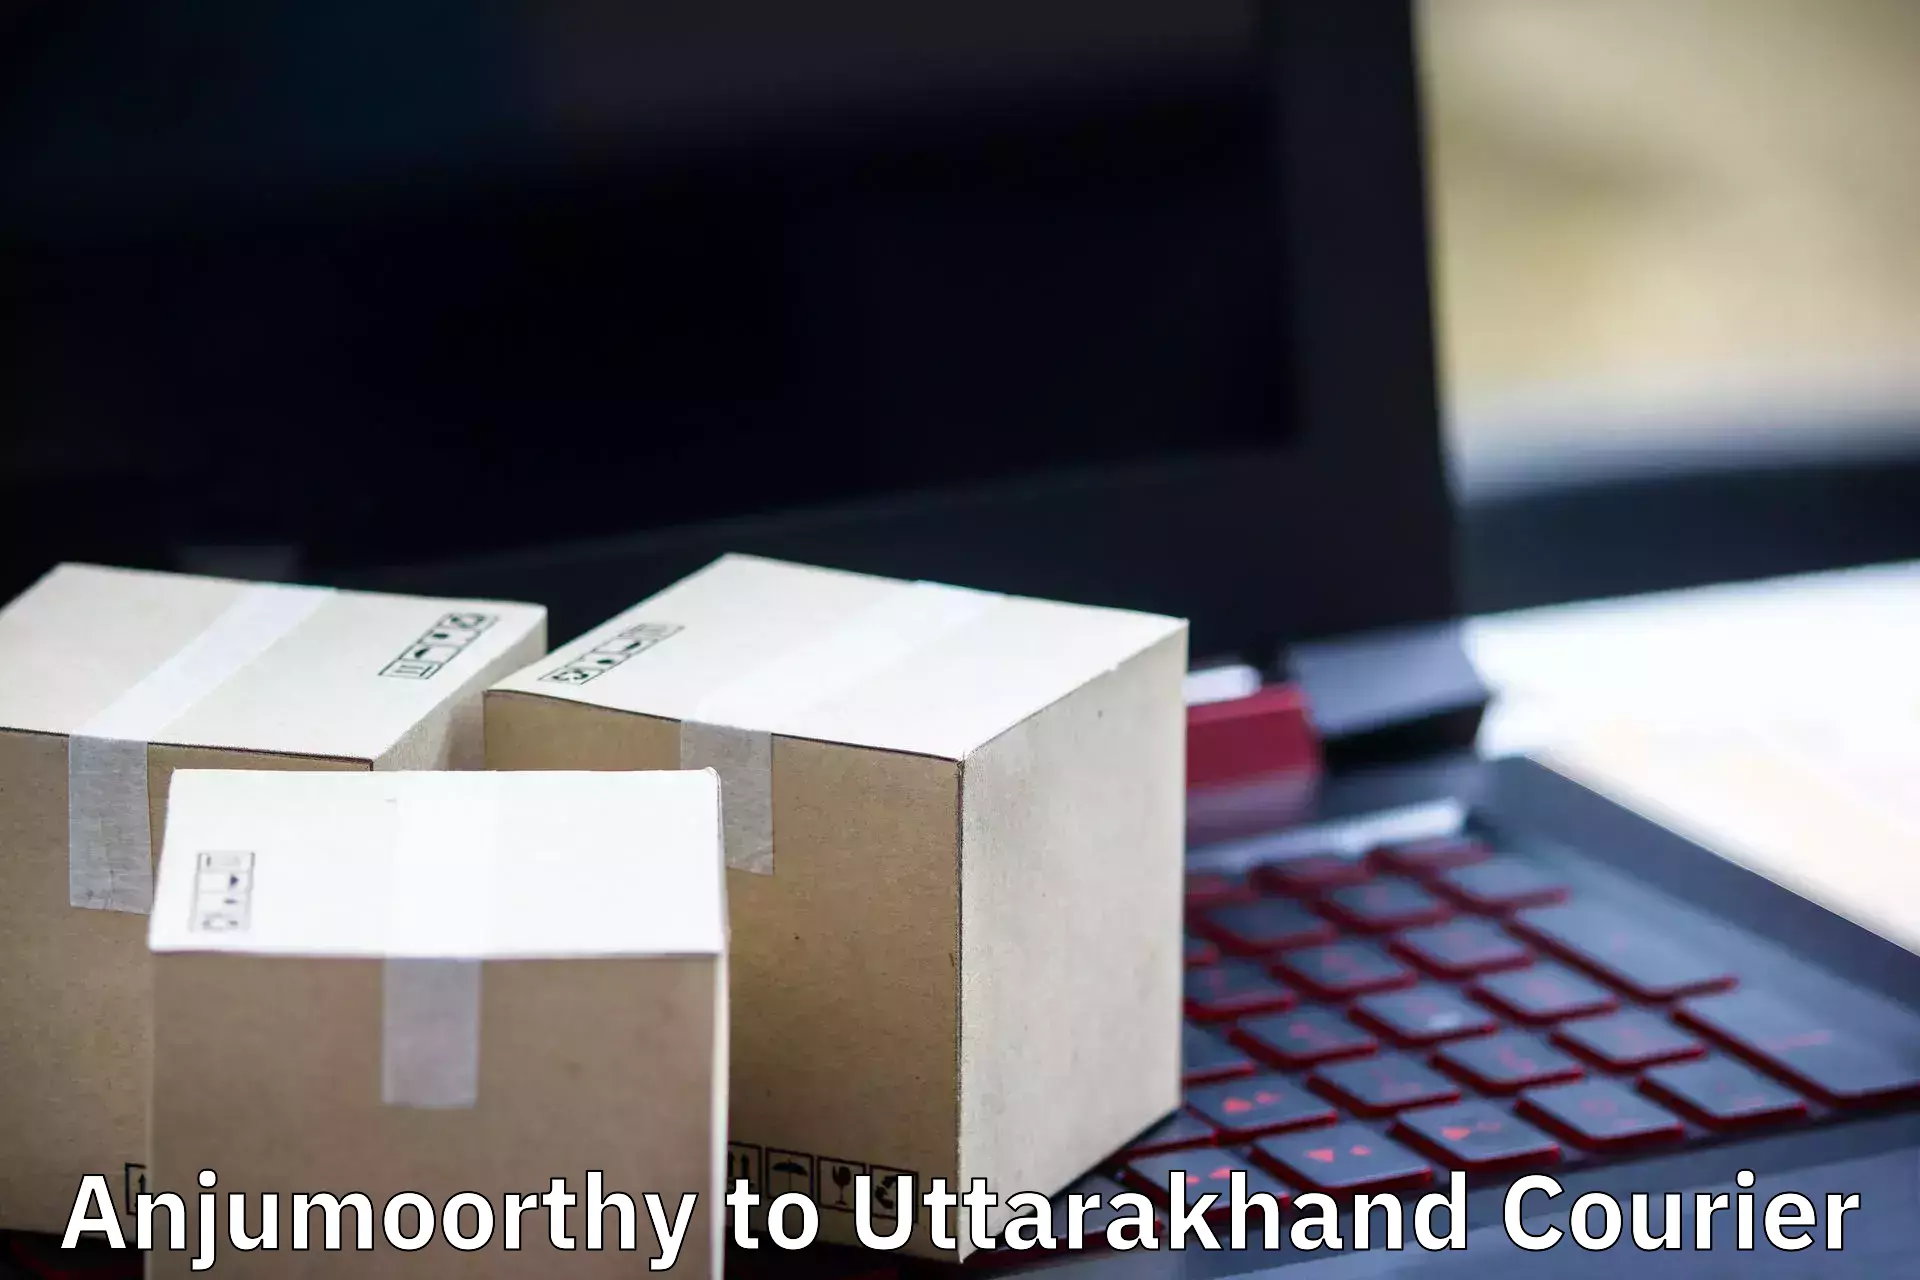 Quality moving and storage Anjumoorthy to IIT Roorkee